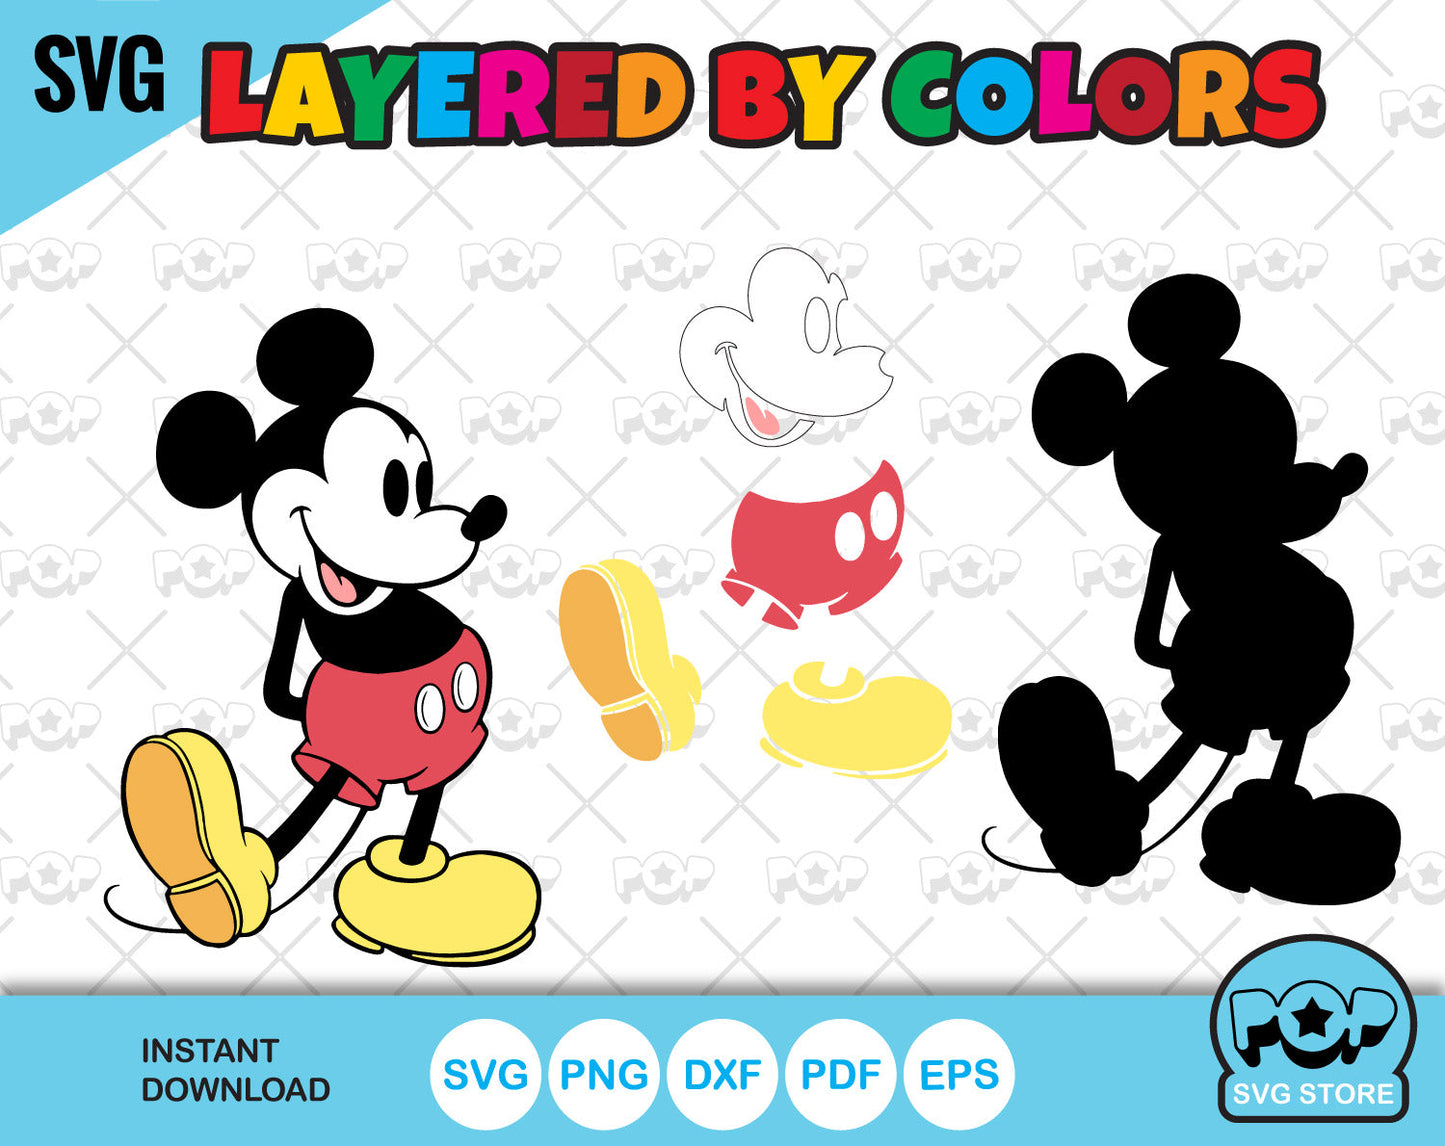 Classic Mickey Mouse BIG BUNDLE 500 files, Mickey svg cut files for Cricut / Silhouette, Mickey Mouse png